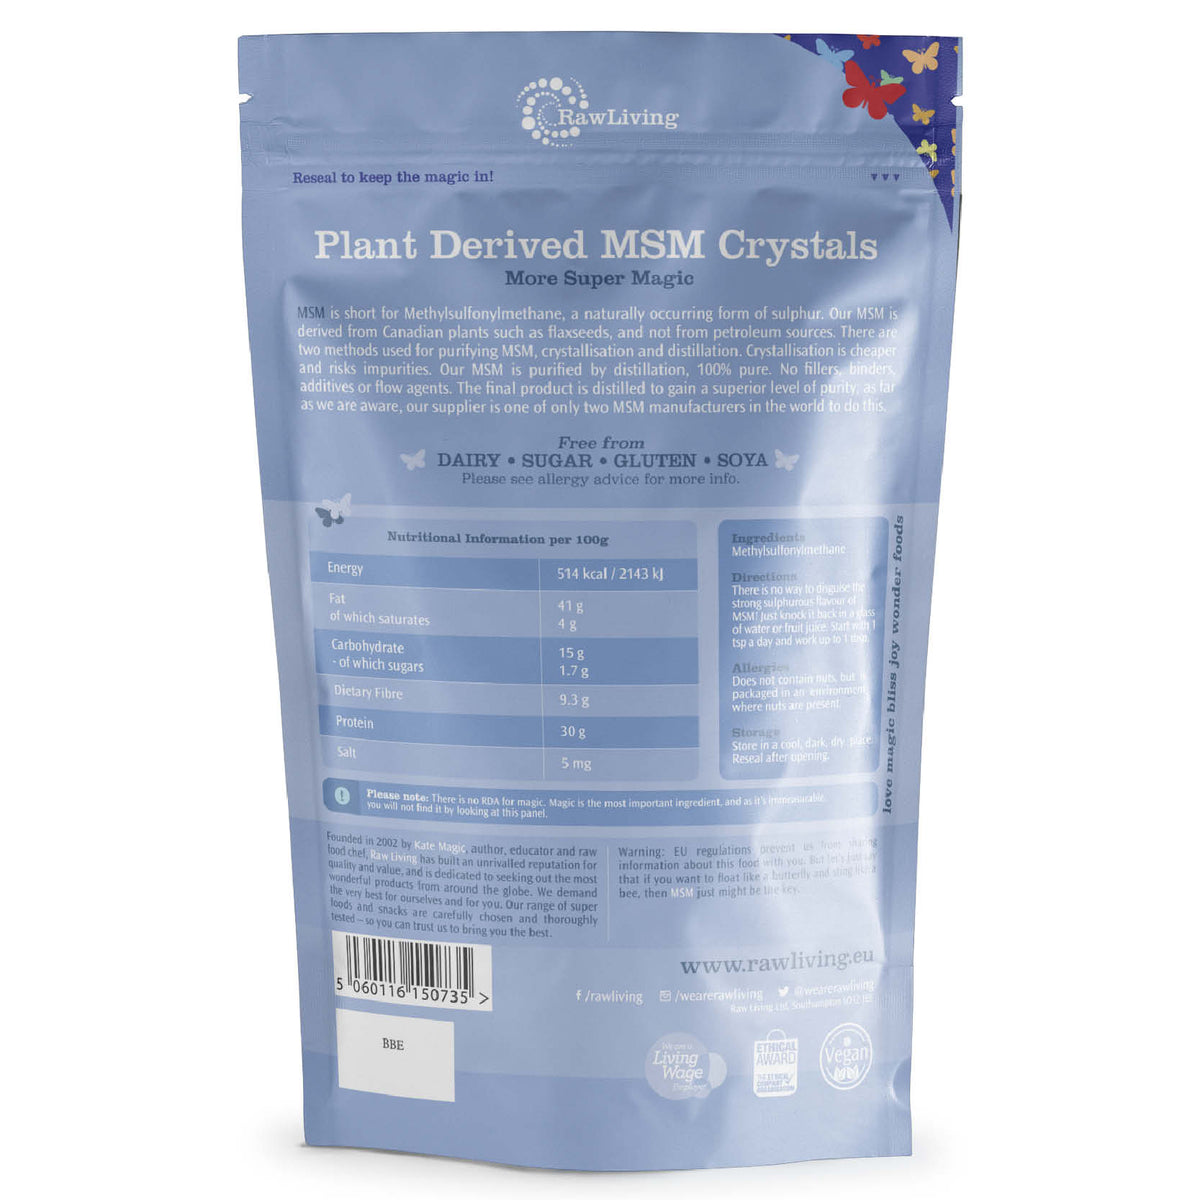 MSM Crystals (Powder) | Raw Living UK | Supplements | Raw Living Plant-Derived MSM (methylsulfonylmethane) crystals are a naturally occurring form of the mineral Sulphur, which is great for Hair, Skin &amp; Nails.